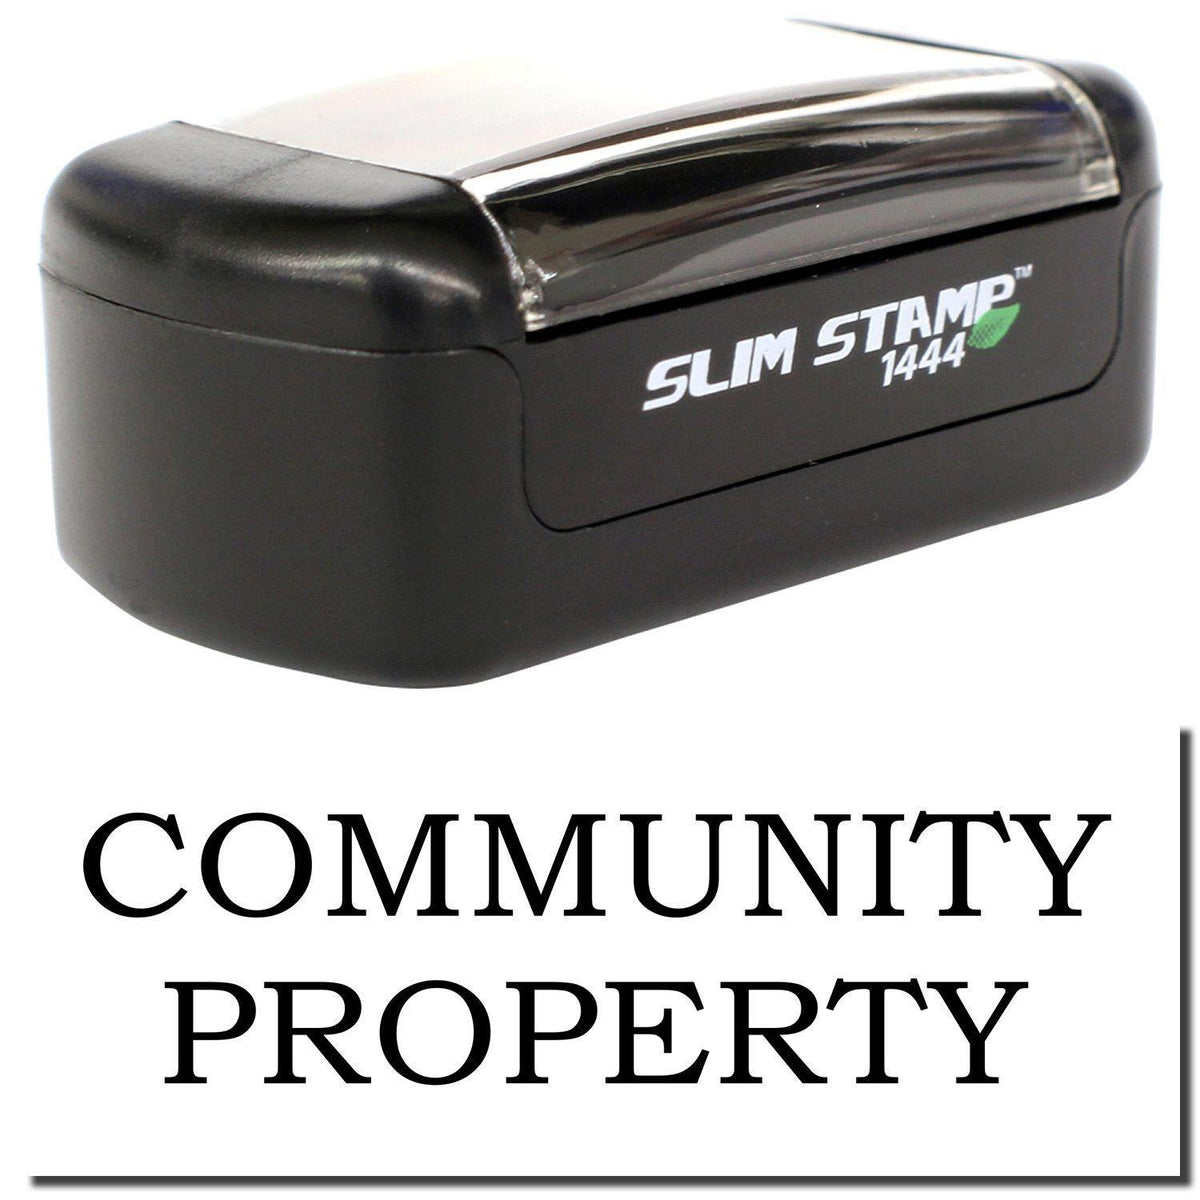 A stock office pre-inked stamp with a stamped image showing how the text &quot;COMMUNITY PROPERTY&quot; is displayed after stamping.